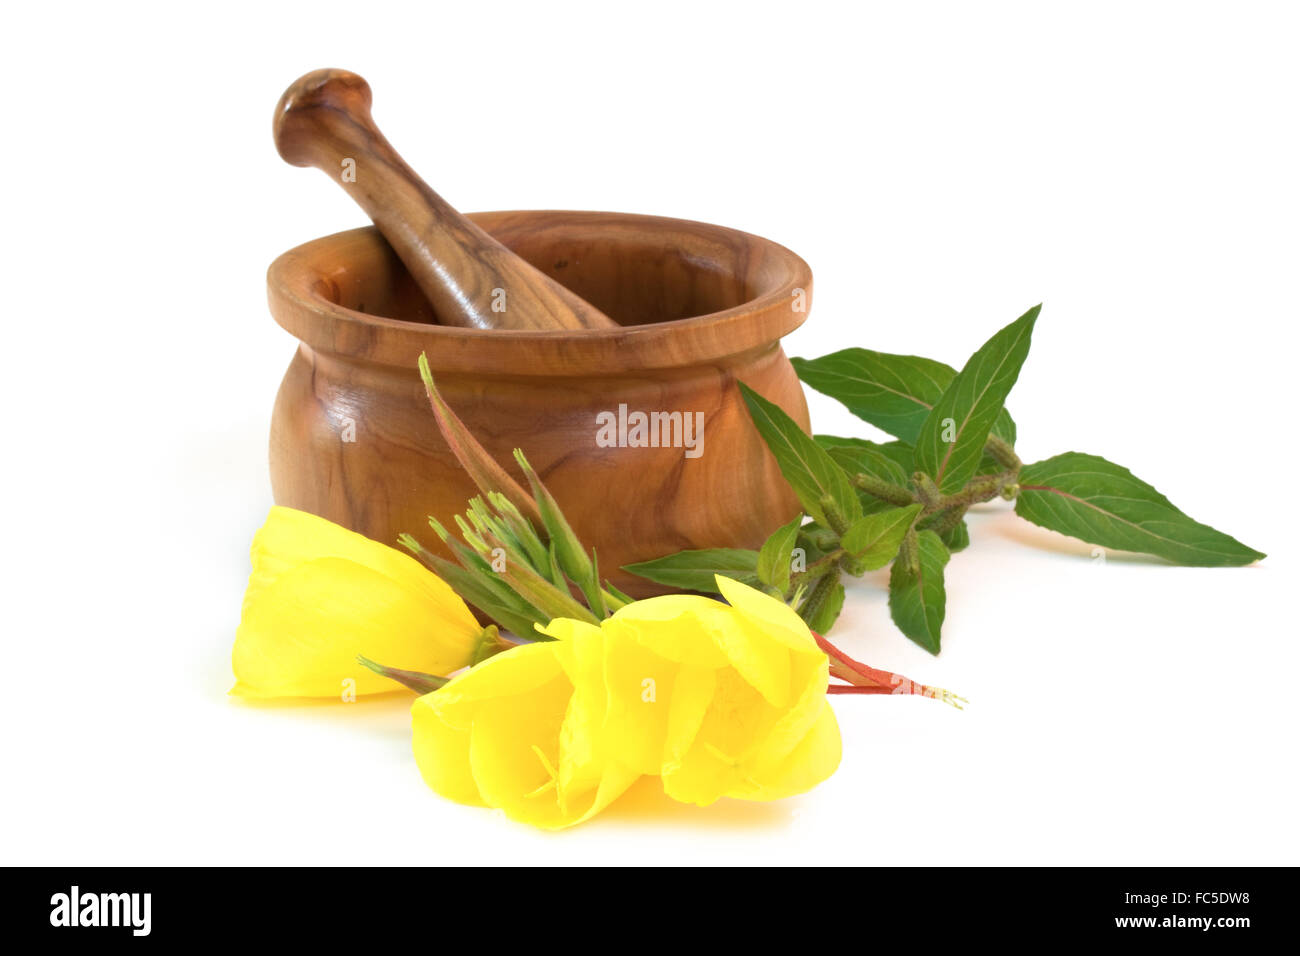 Evening primrose with wooden mortar Stock Photo